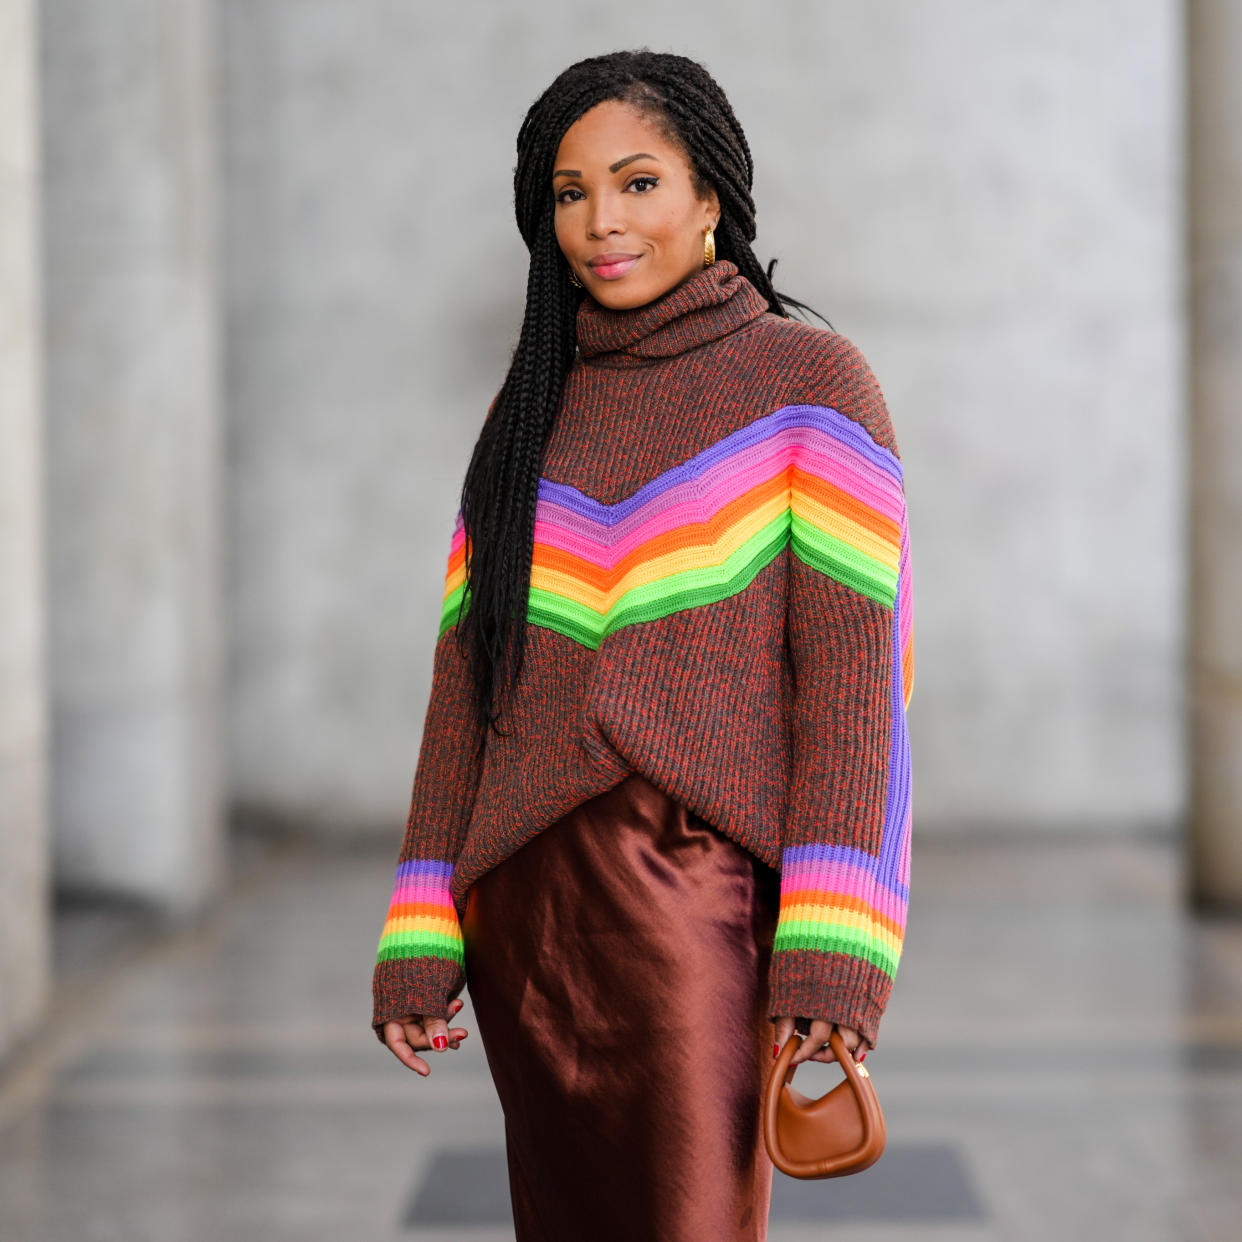  woman in colorful turtleneck and brown skirt 